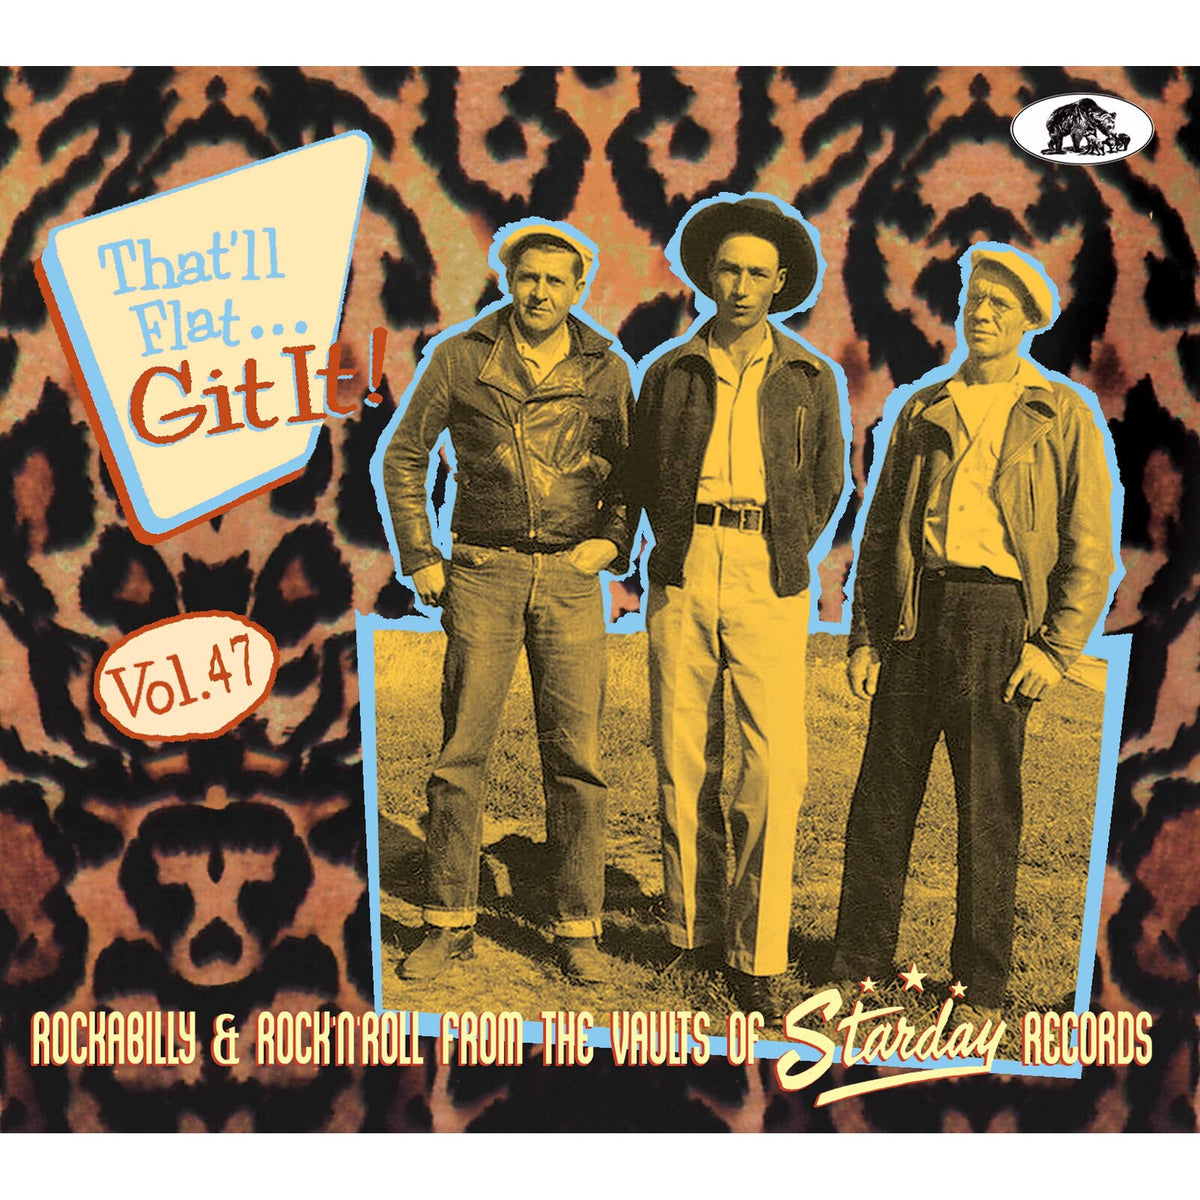 Various Artists - That'll Flat Git It! Volume 47 - Rockabilly and Rock 'n' roll from the vaults of Starday Records - BCD17671